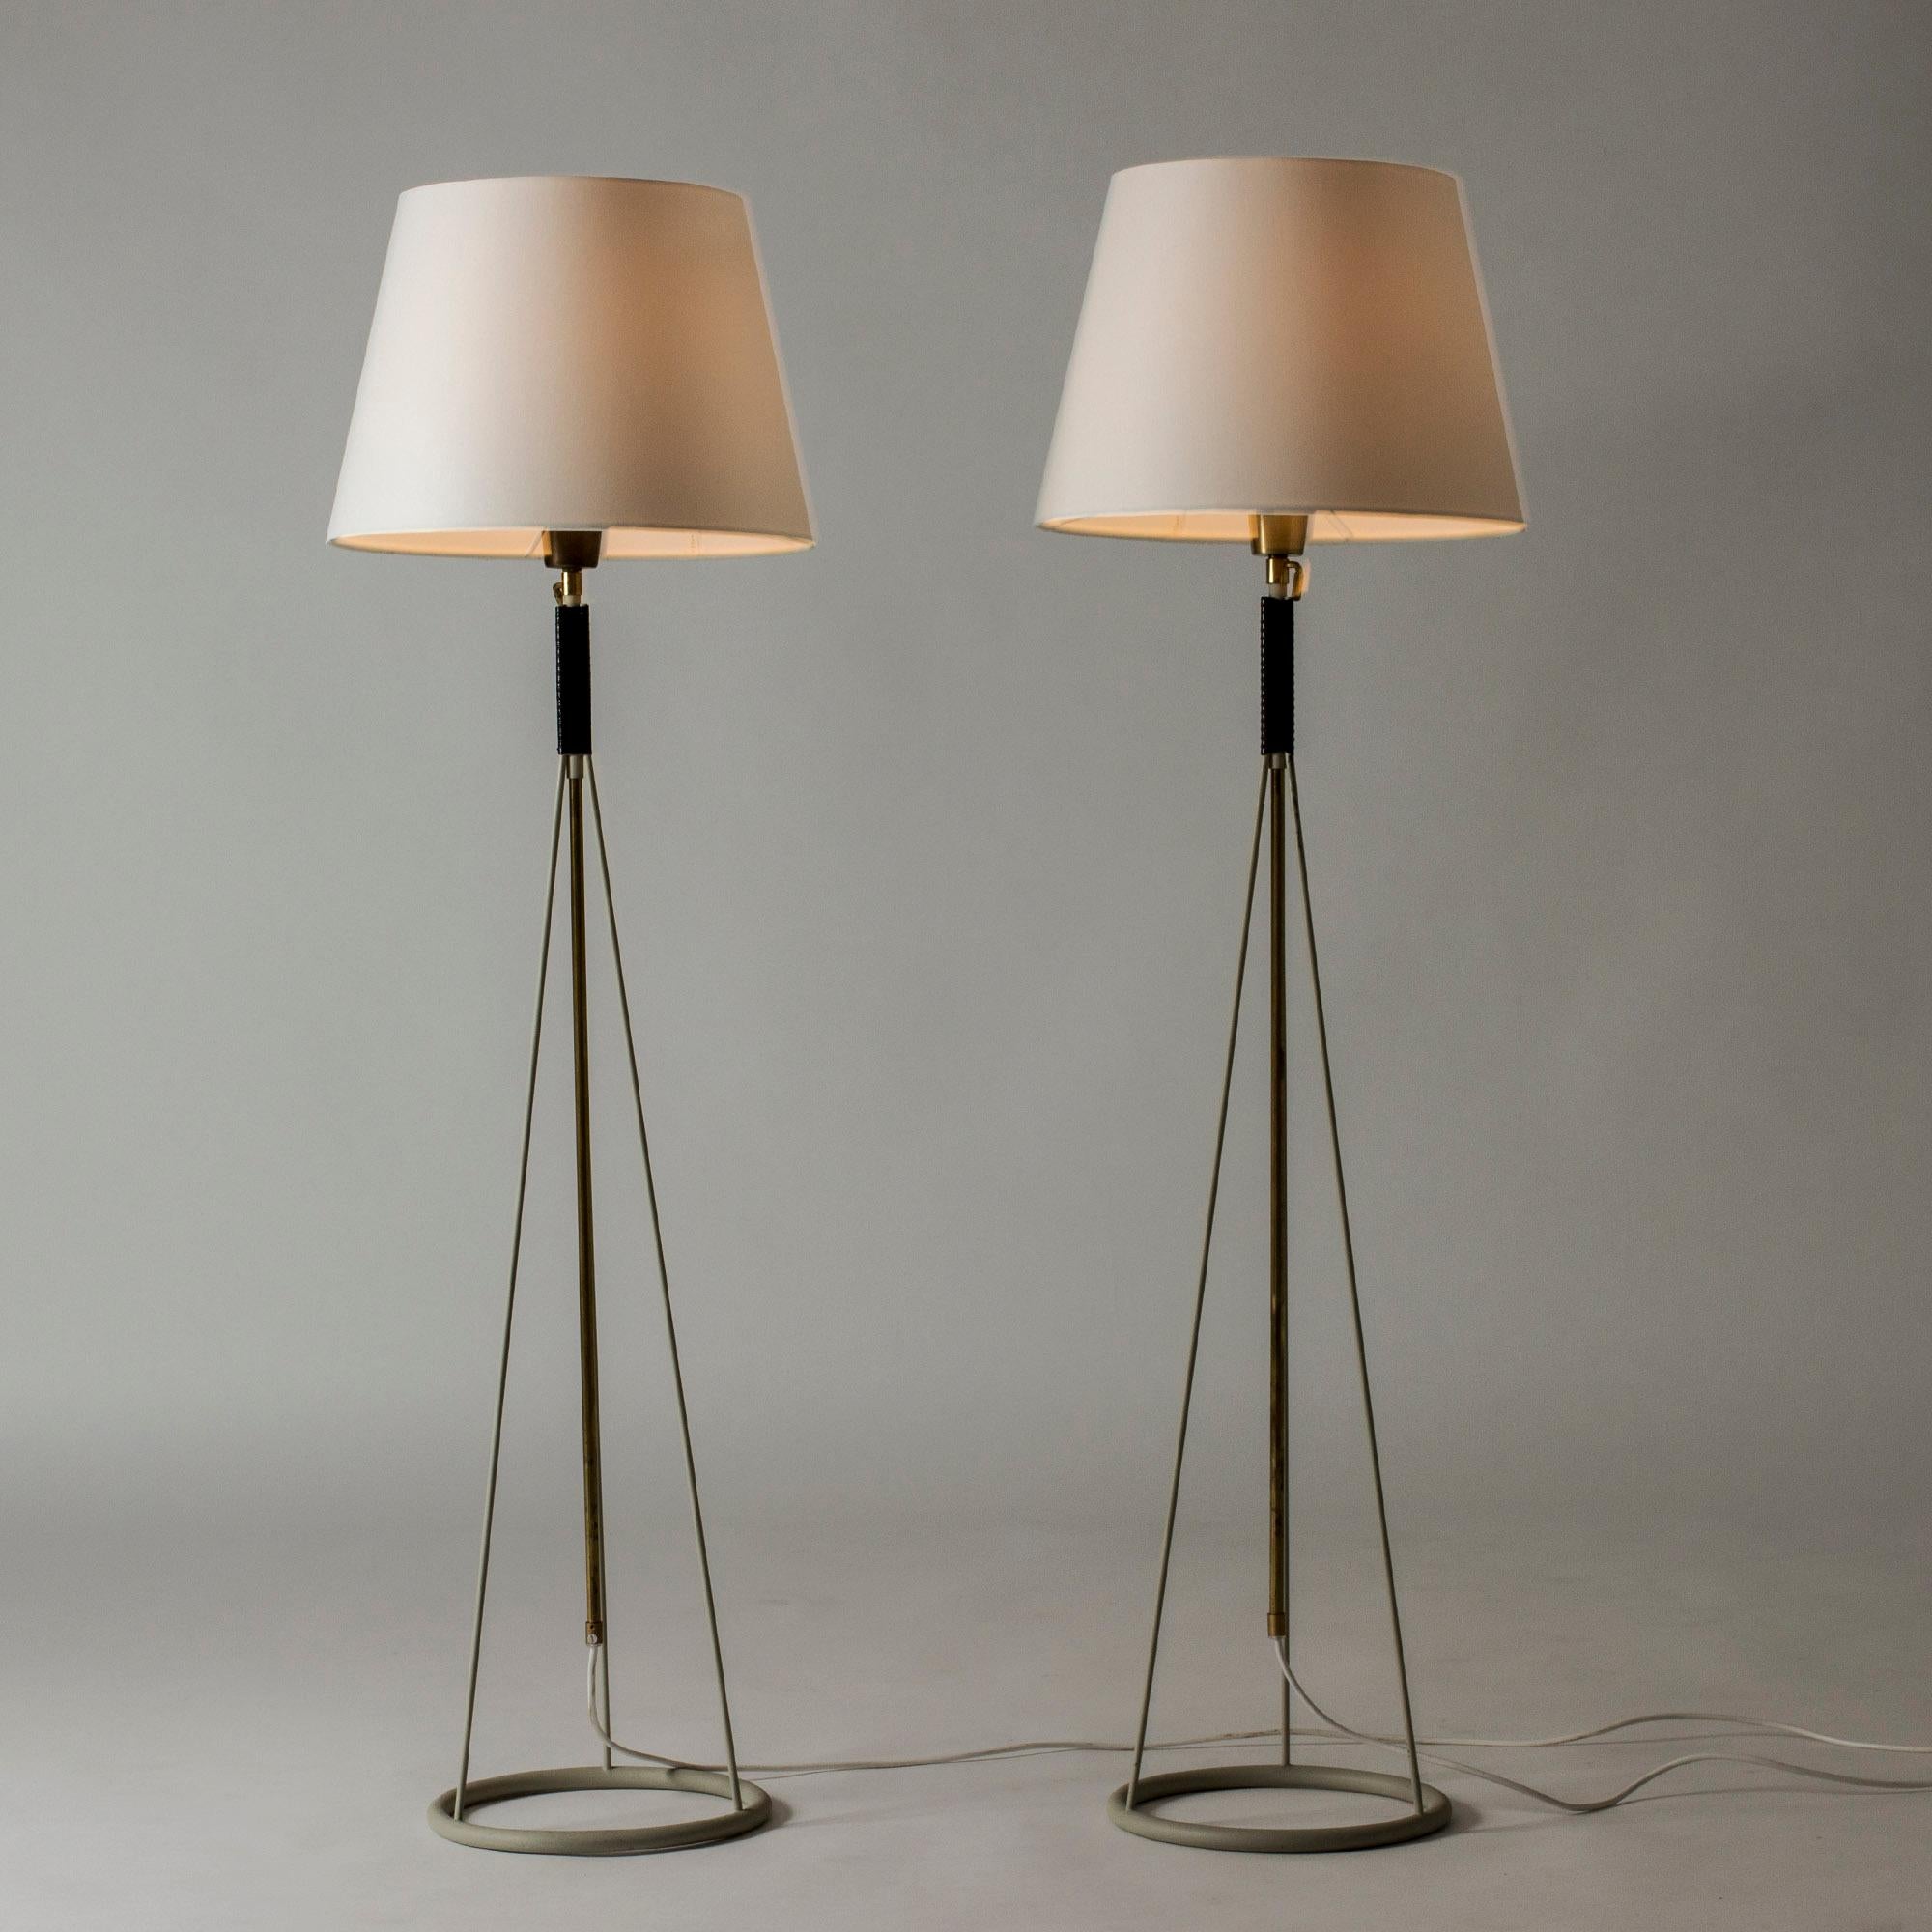 Pair of cool floor lamps from Luco, made from lacquered metal with brass details. Graphic look with circular bases. Adjustable height, 122-184 cm.